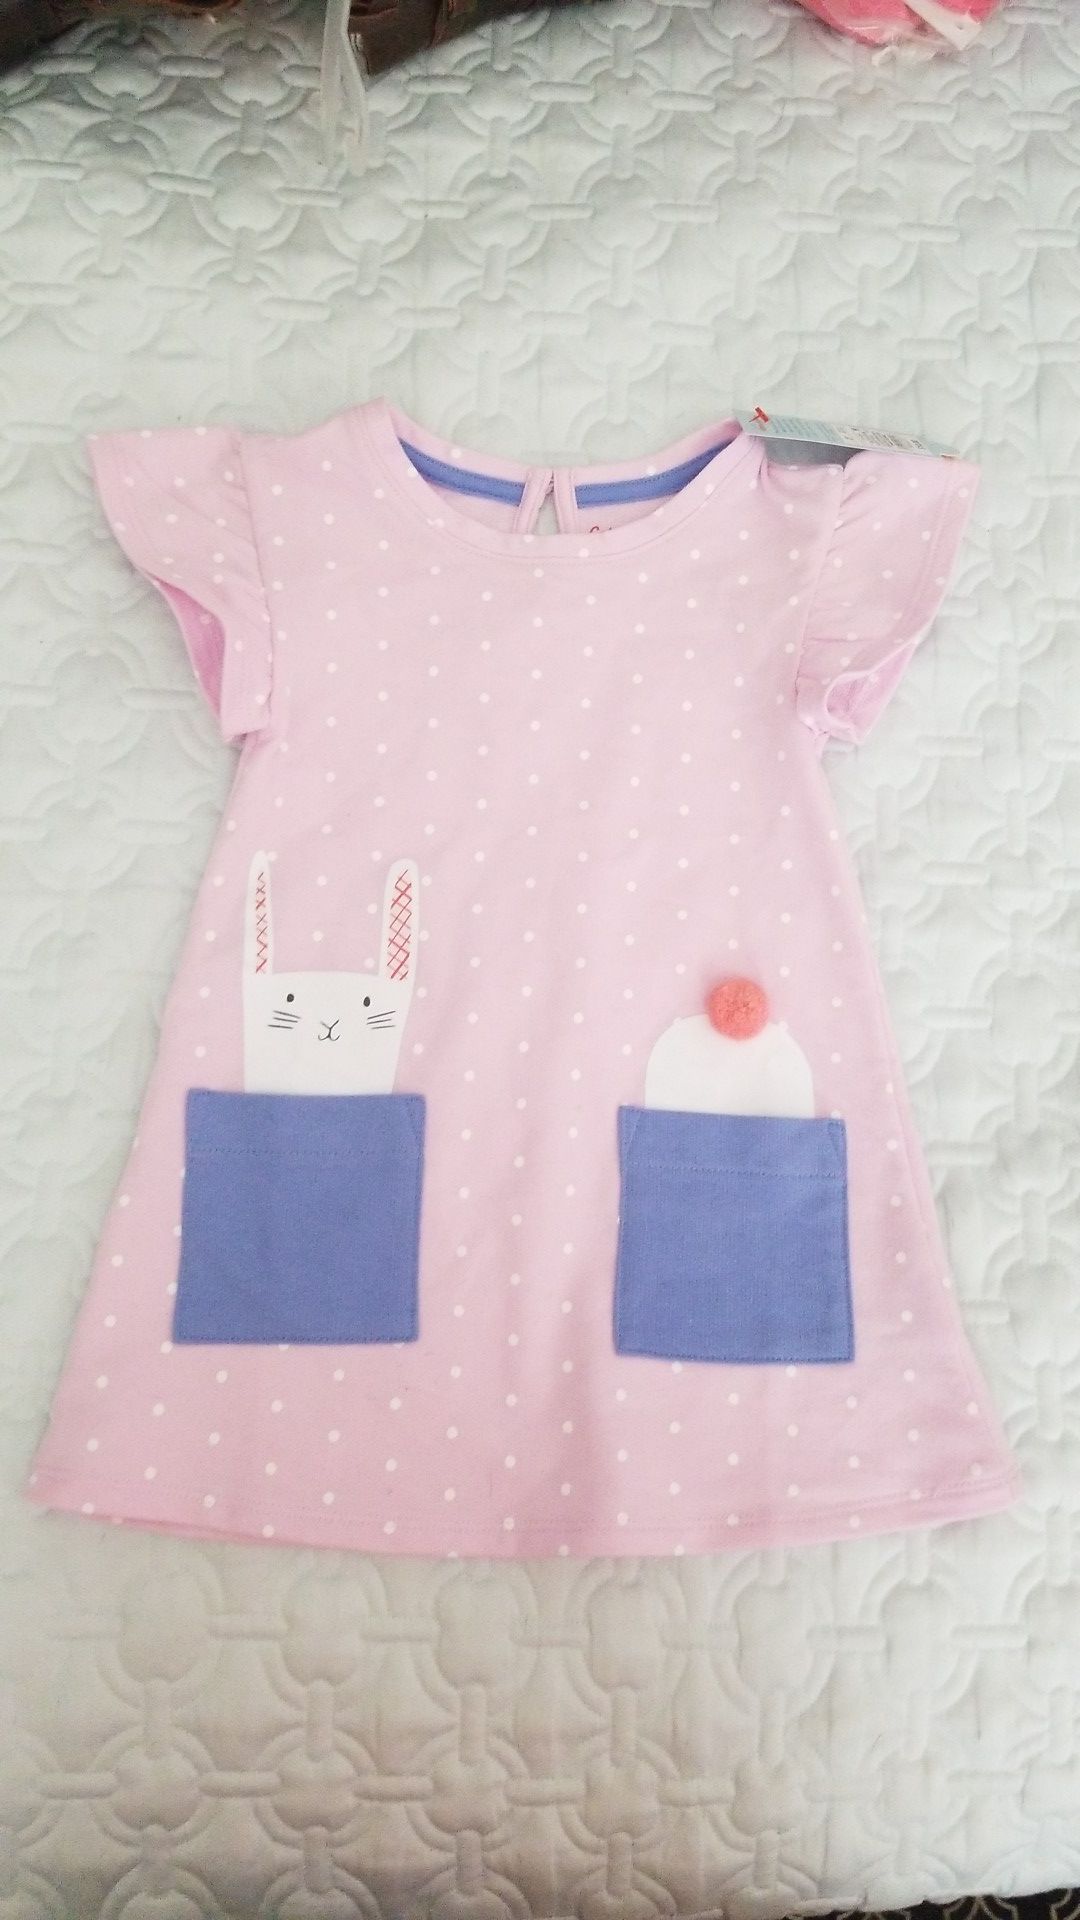 New size 2T Cat & Jack bunny rabbit flutter sleeve dress with pom pom tail nwt pink purple gift Easter